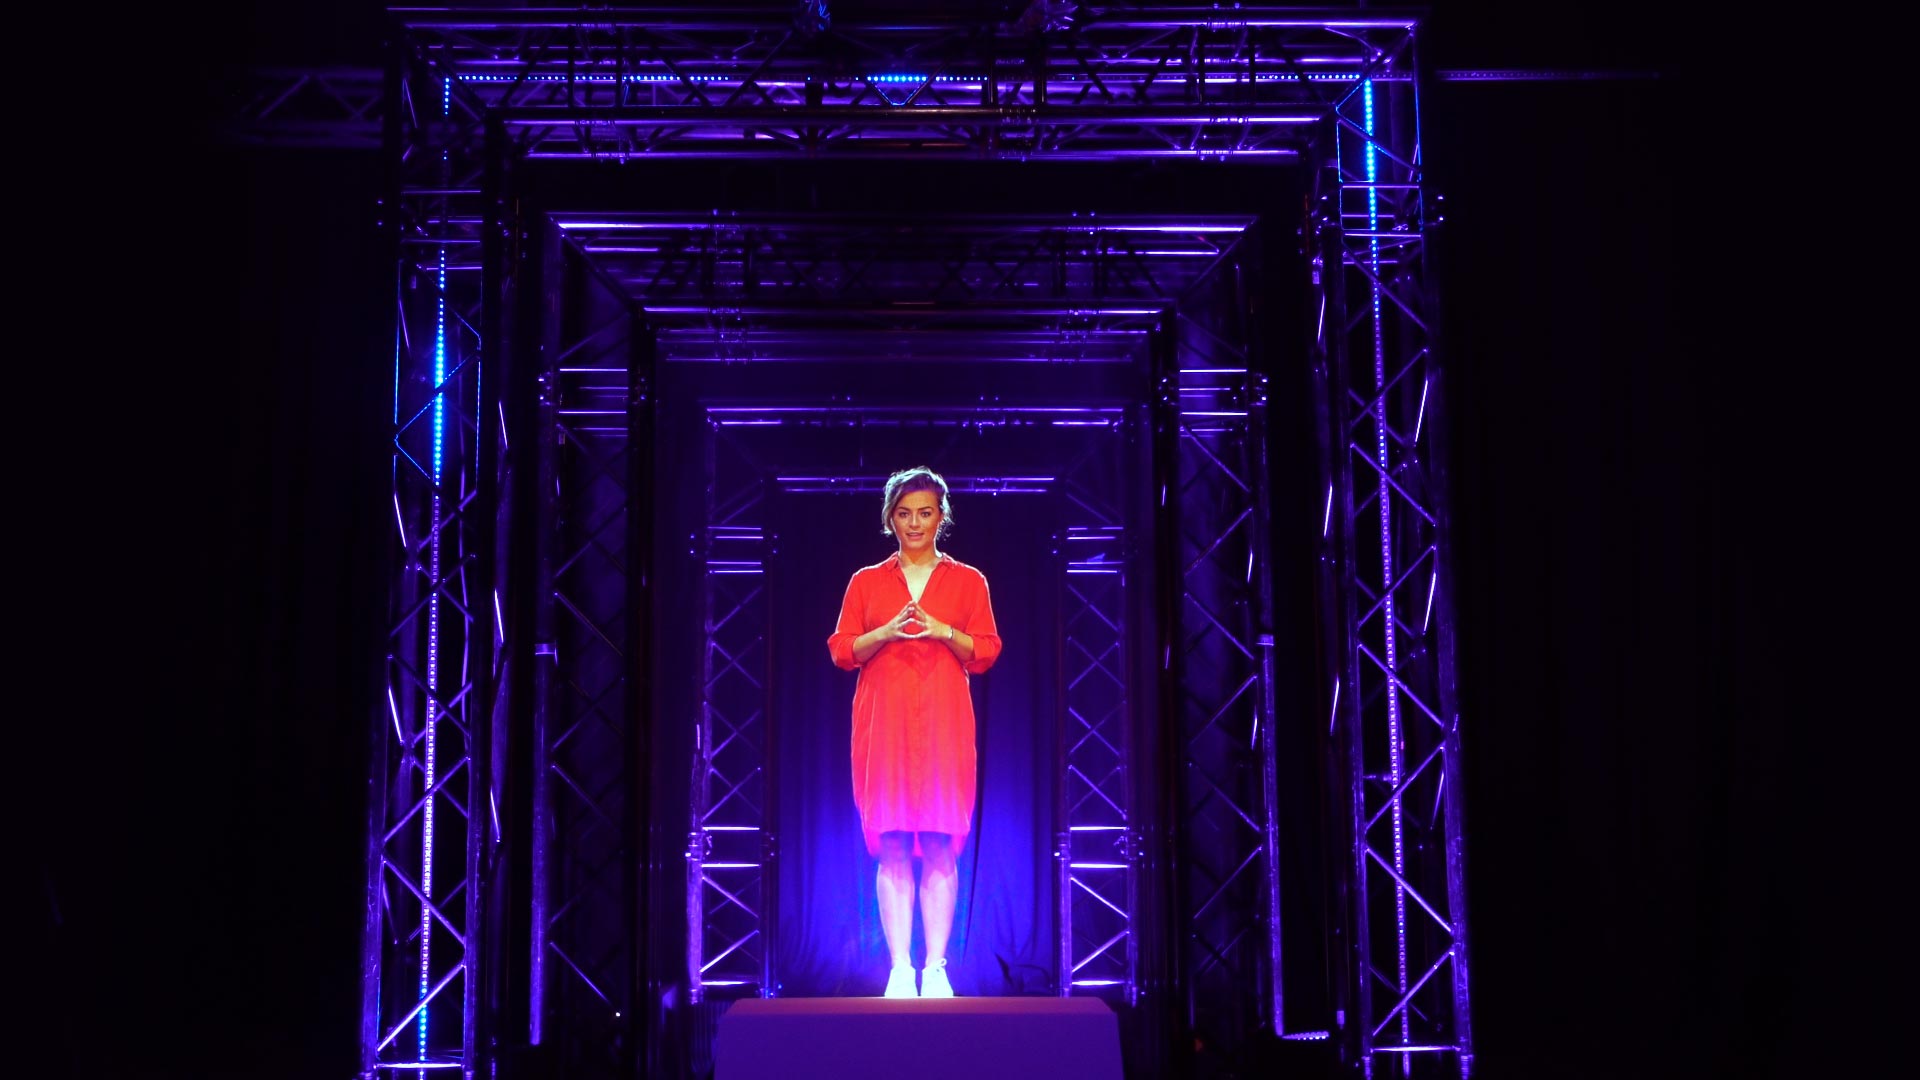 Virtual Events: 3D Holograms for your Digital Event